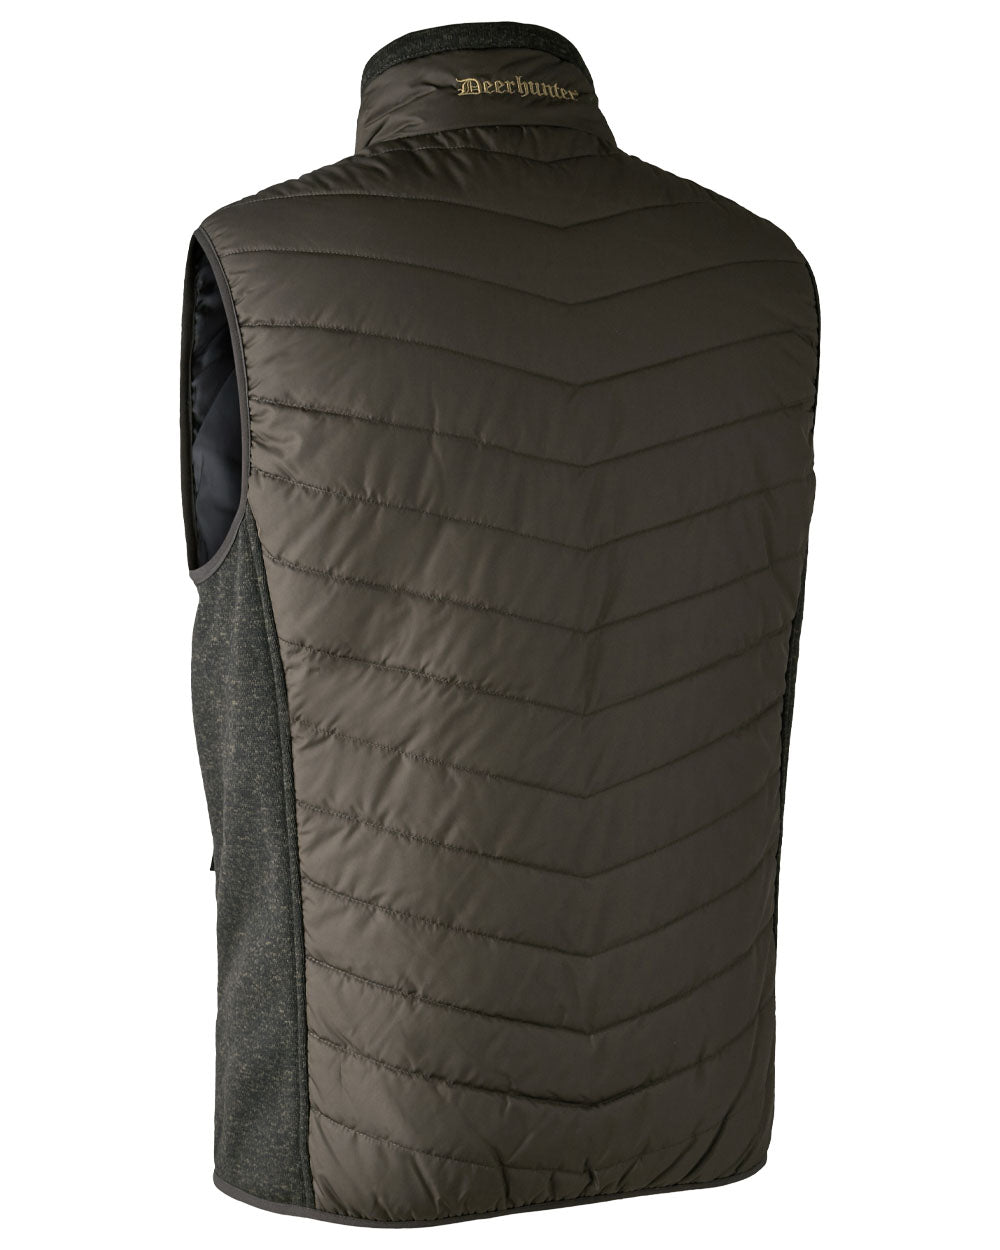 Timber coloured Deerhunter Moor Padded Waistcoat with Knit on White background 